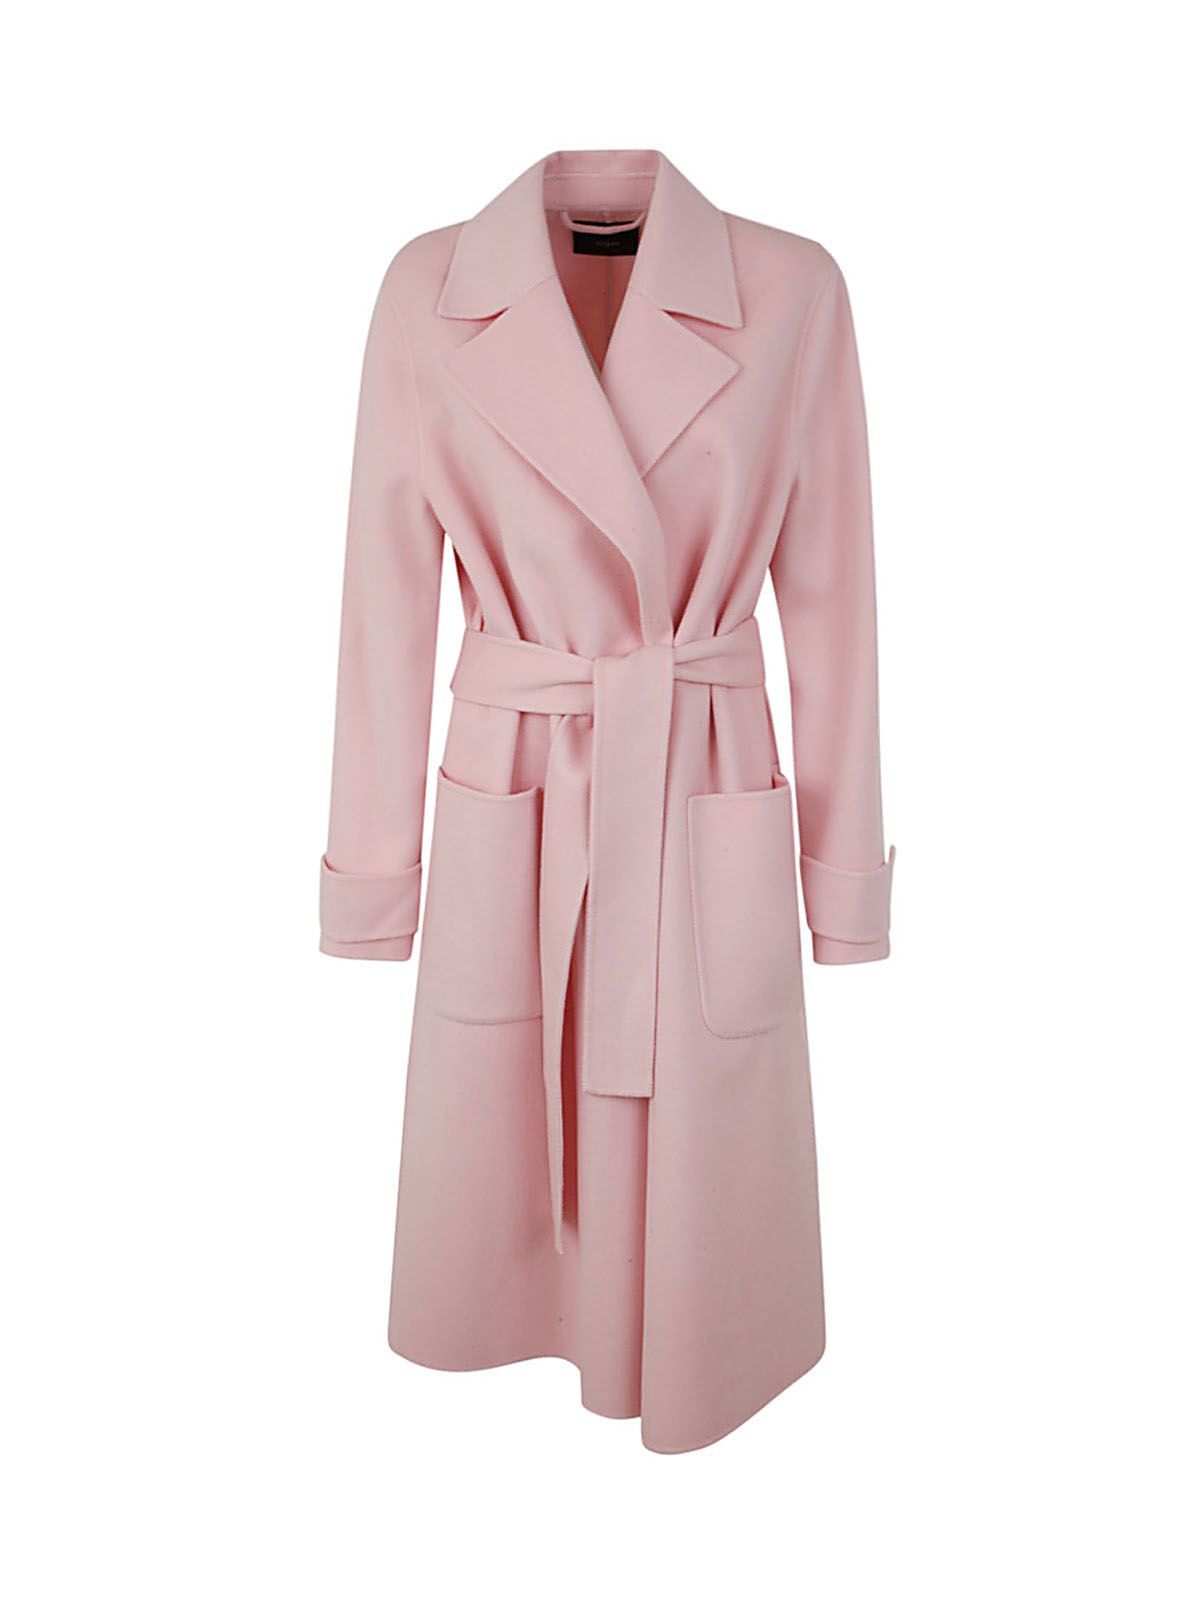 Joseph Arline Coat Dbl Face Cashmere In Candy